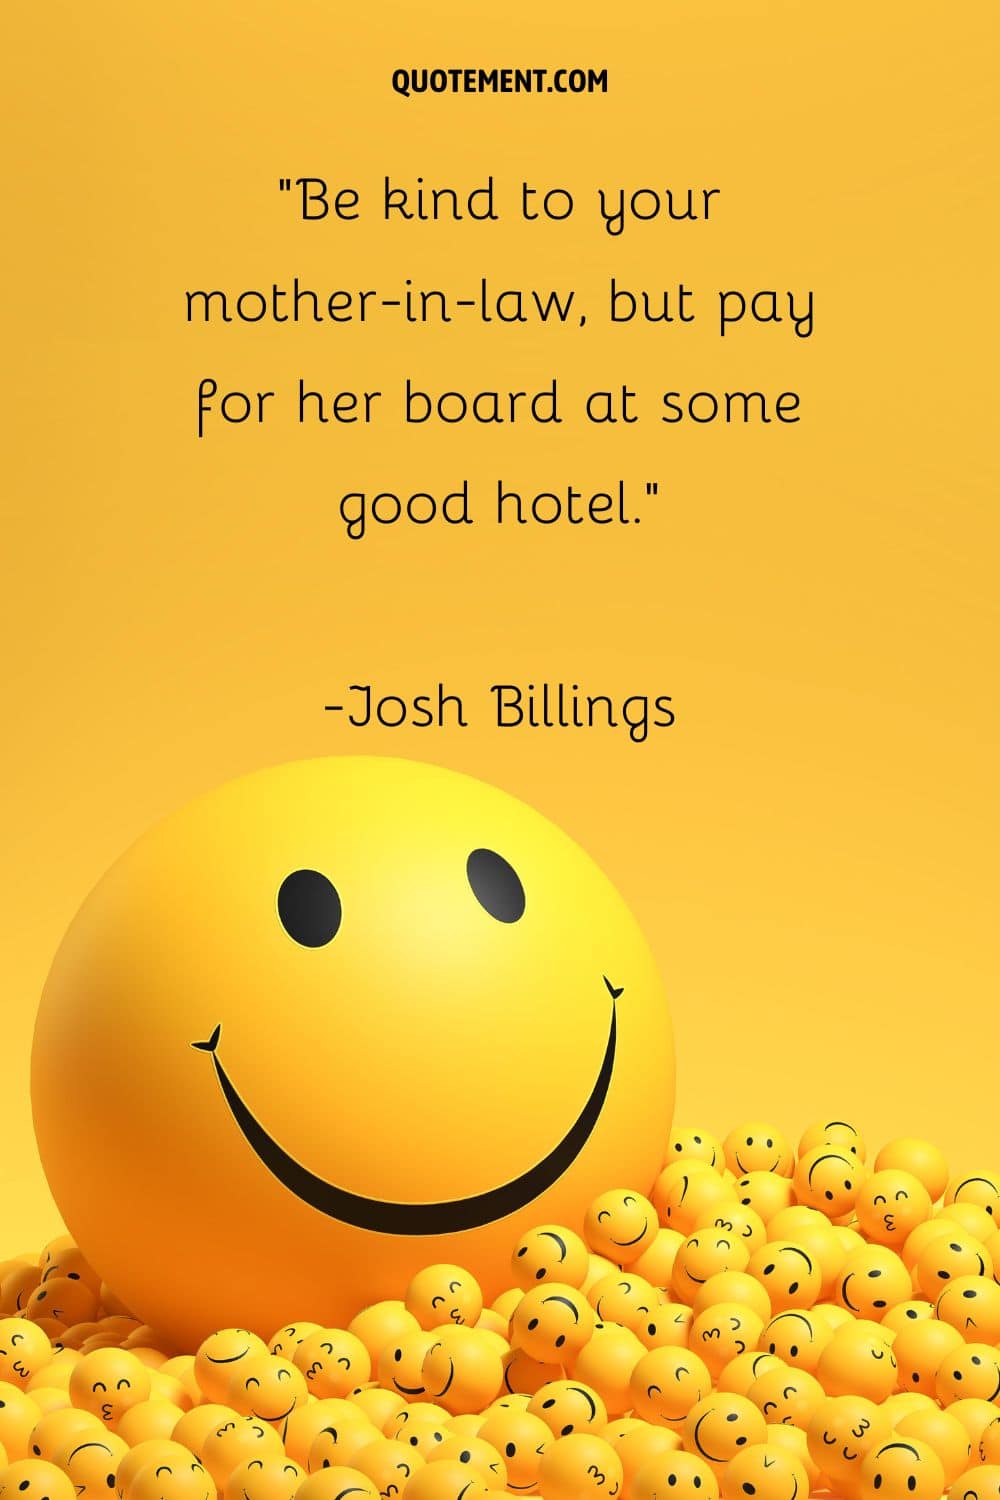 Witty quote about mother-in-law against yellow background.